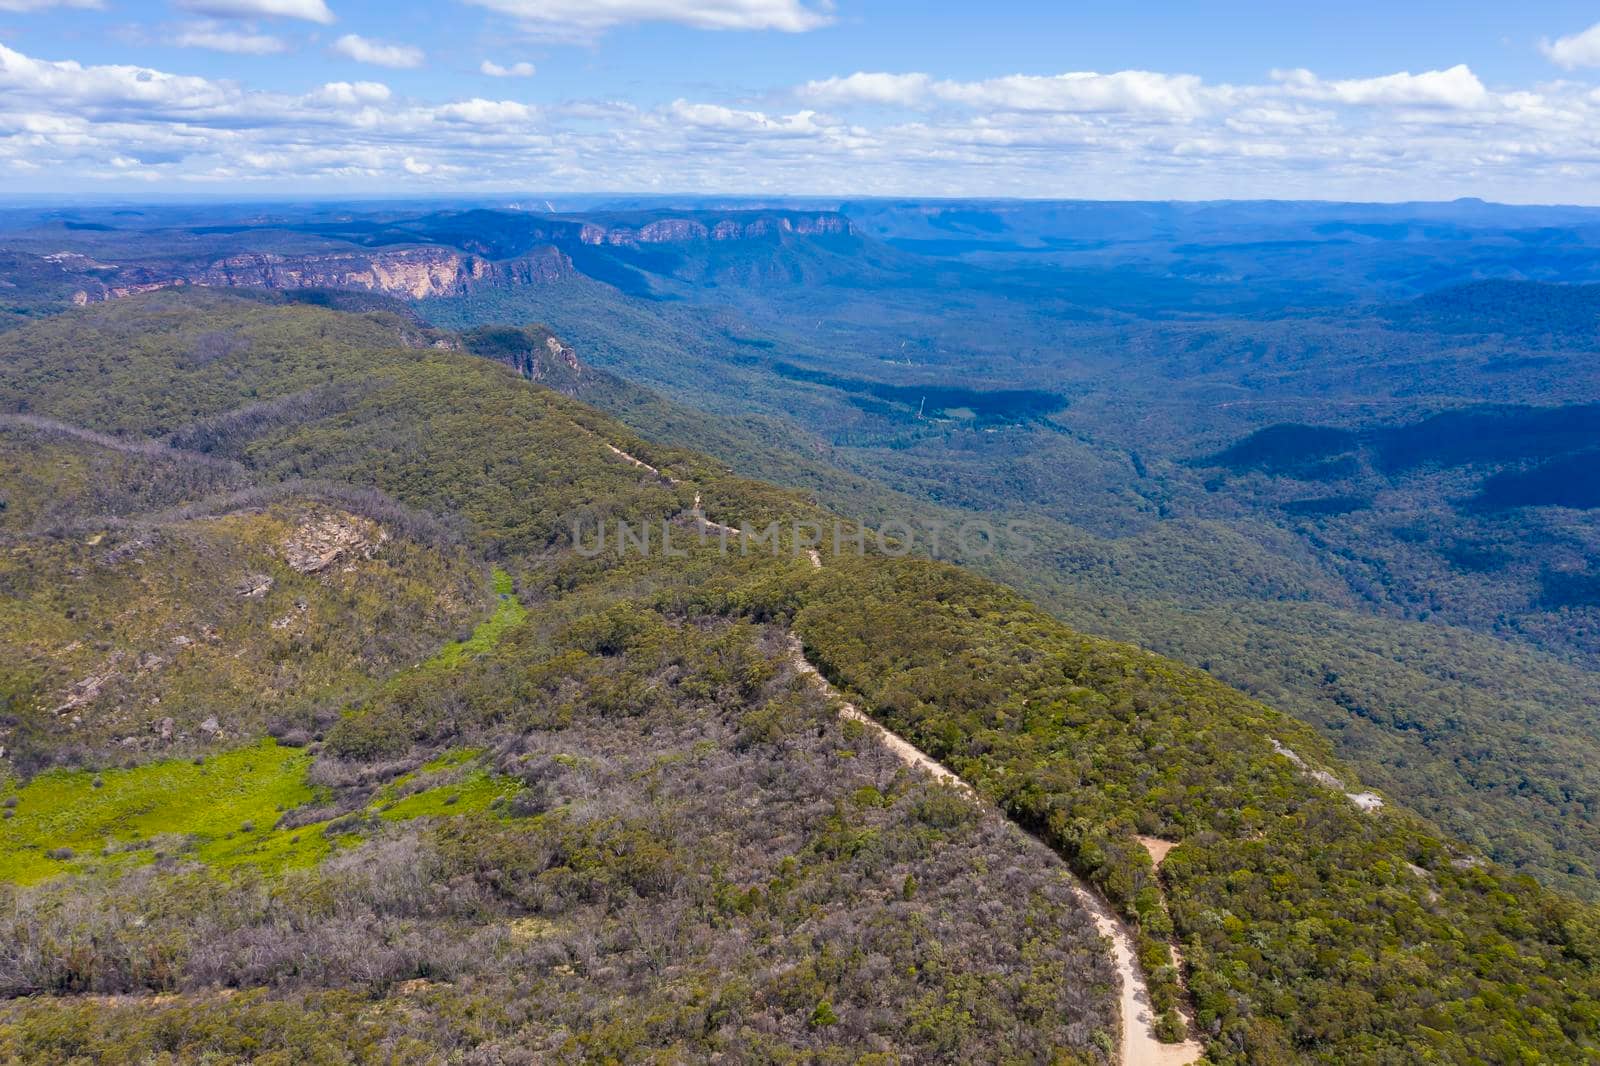 Aerial view of a dirt track on the ridgeline of the Jamison Valley in The Blue Mountains in regional New South Wales in Australia